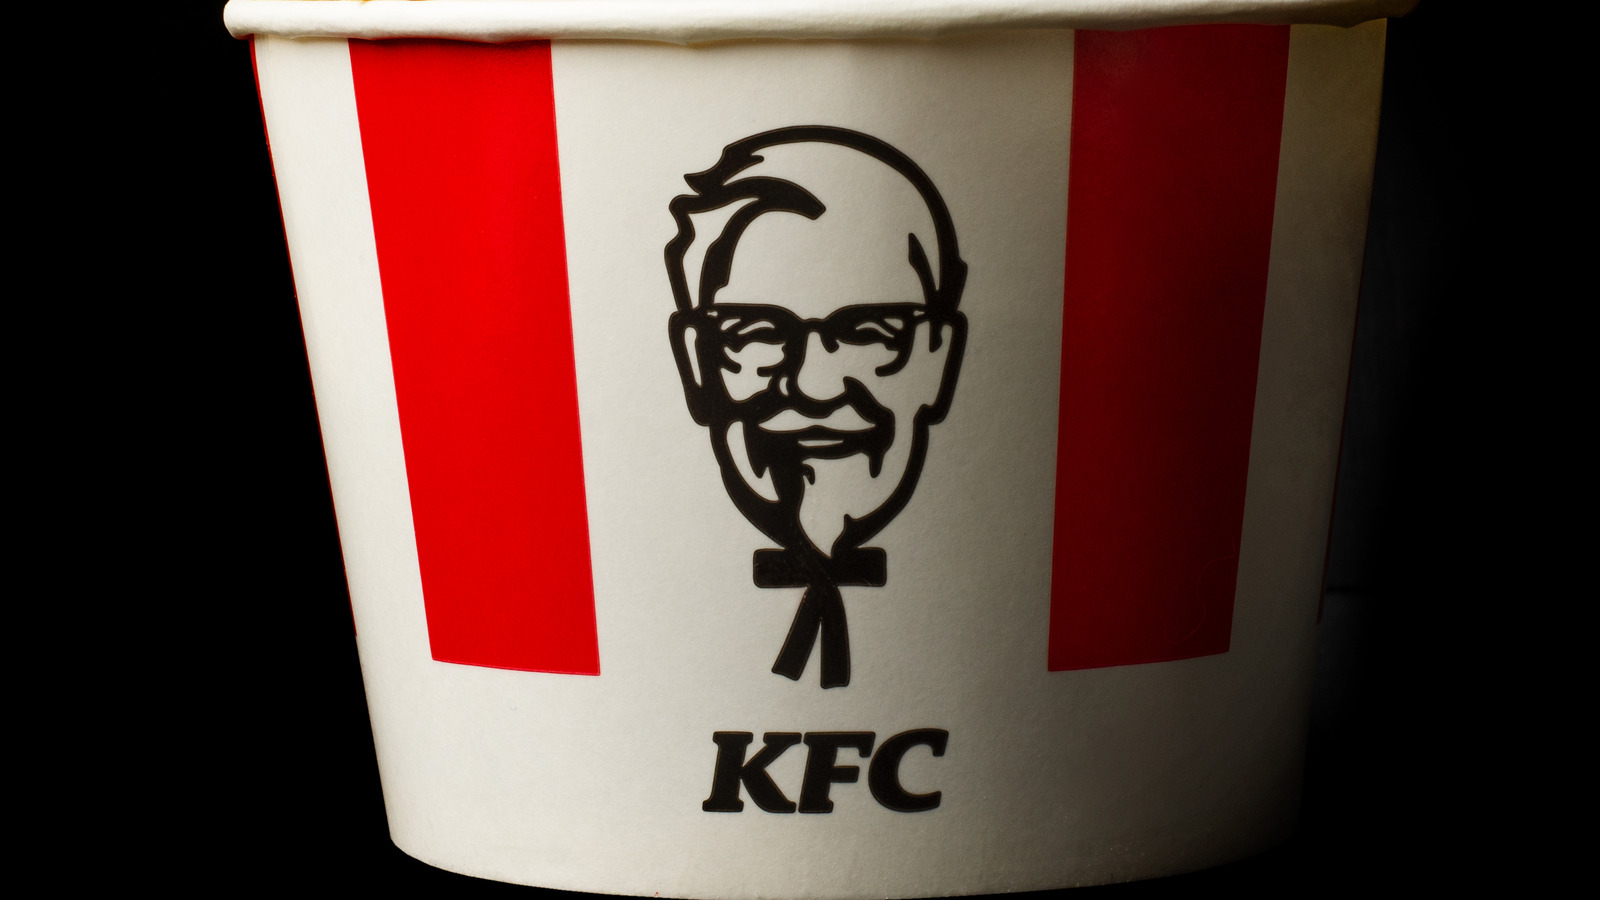 Americans Can't Believe KFC Australia Makes People Pay For This